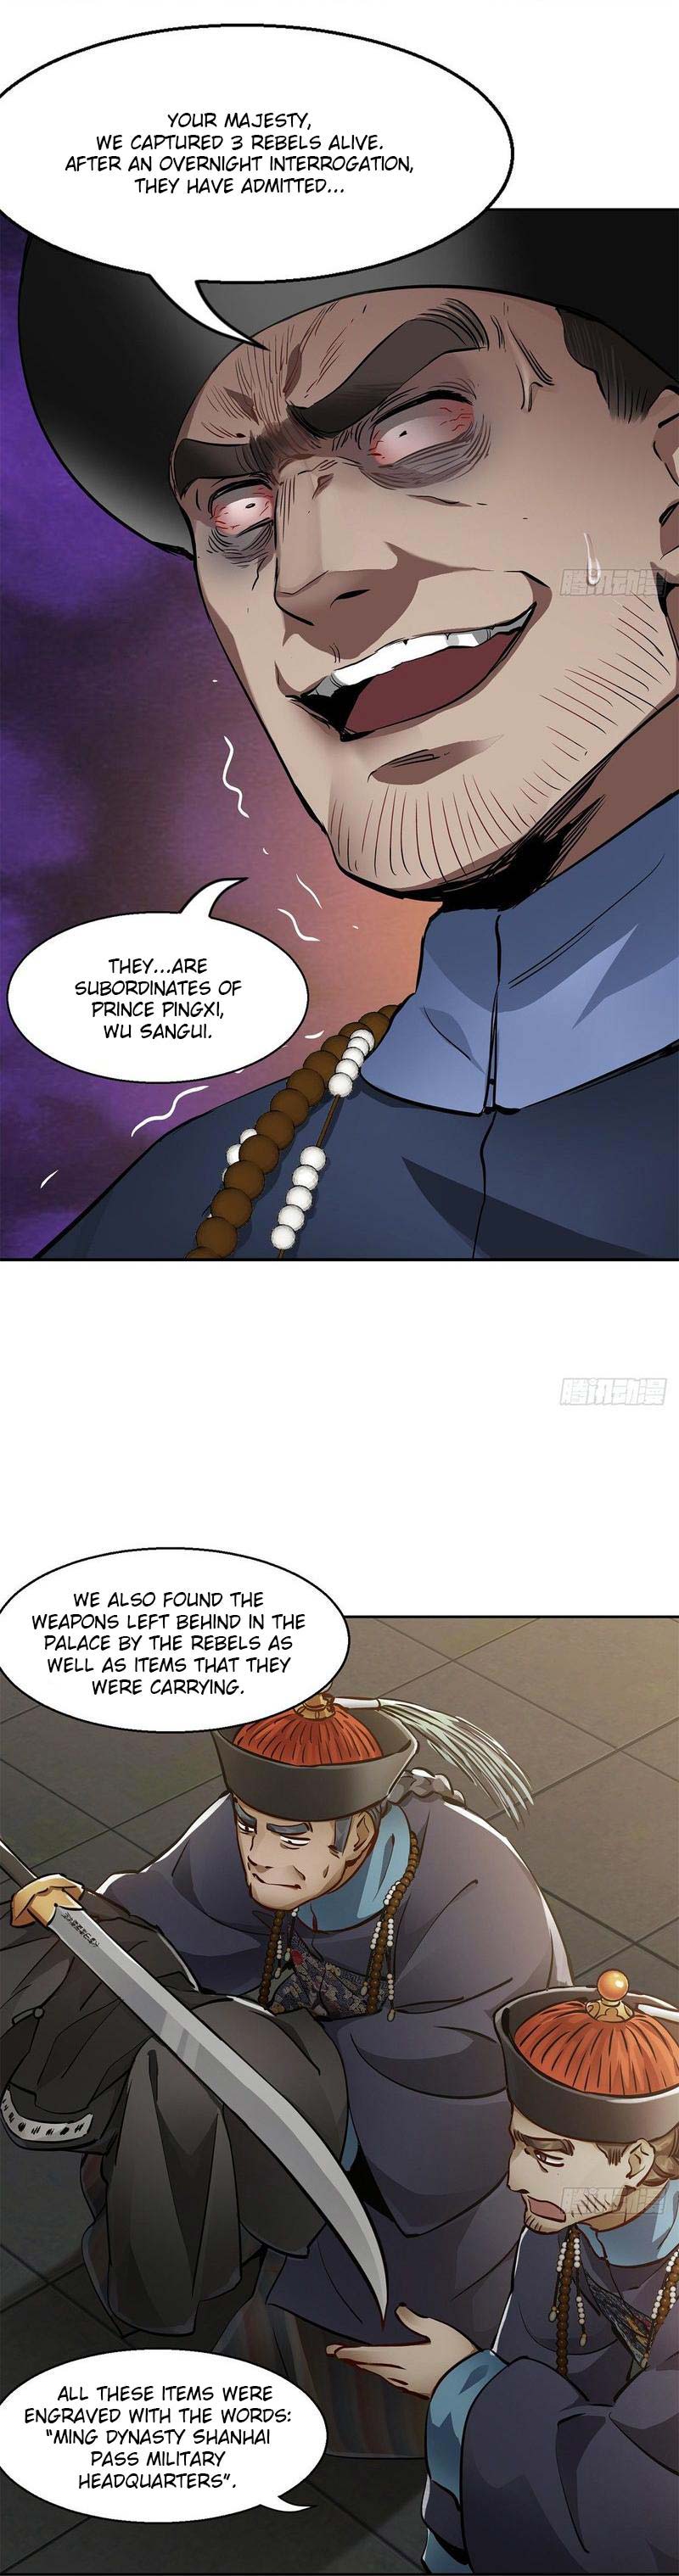 The Deer And The Cauldron - Page 3